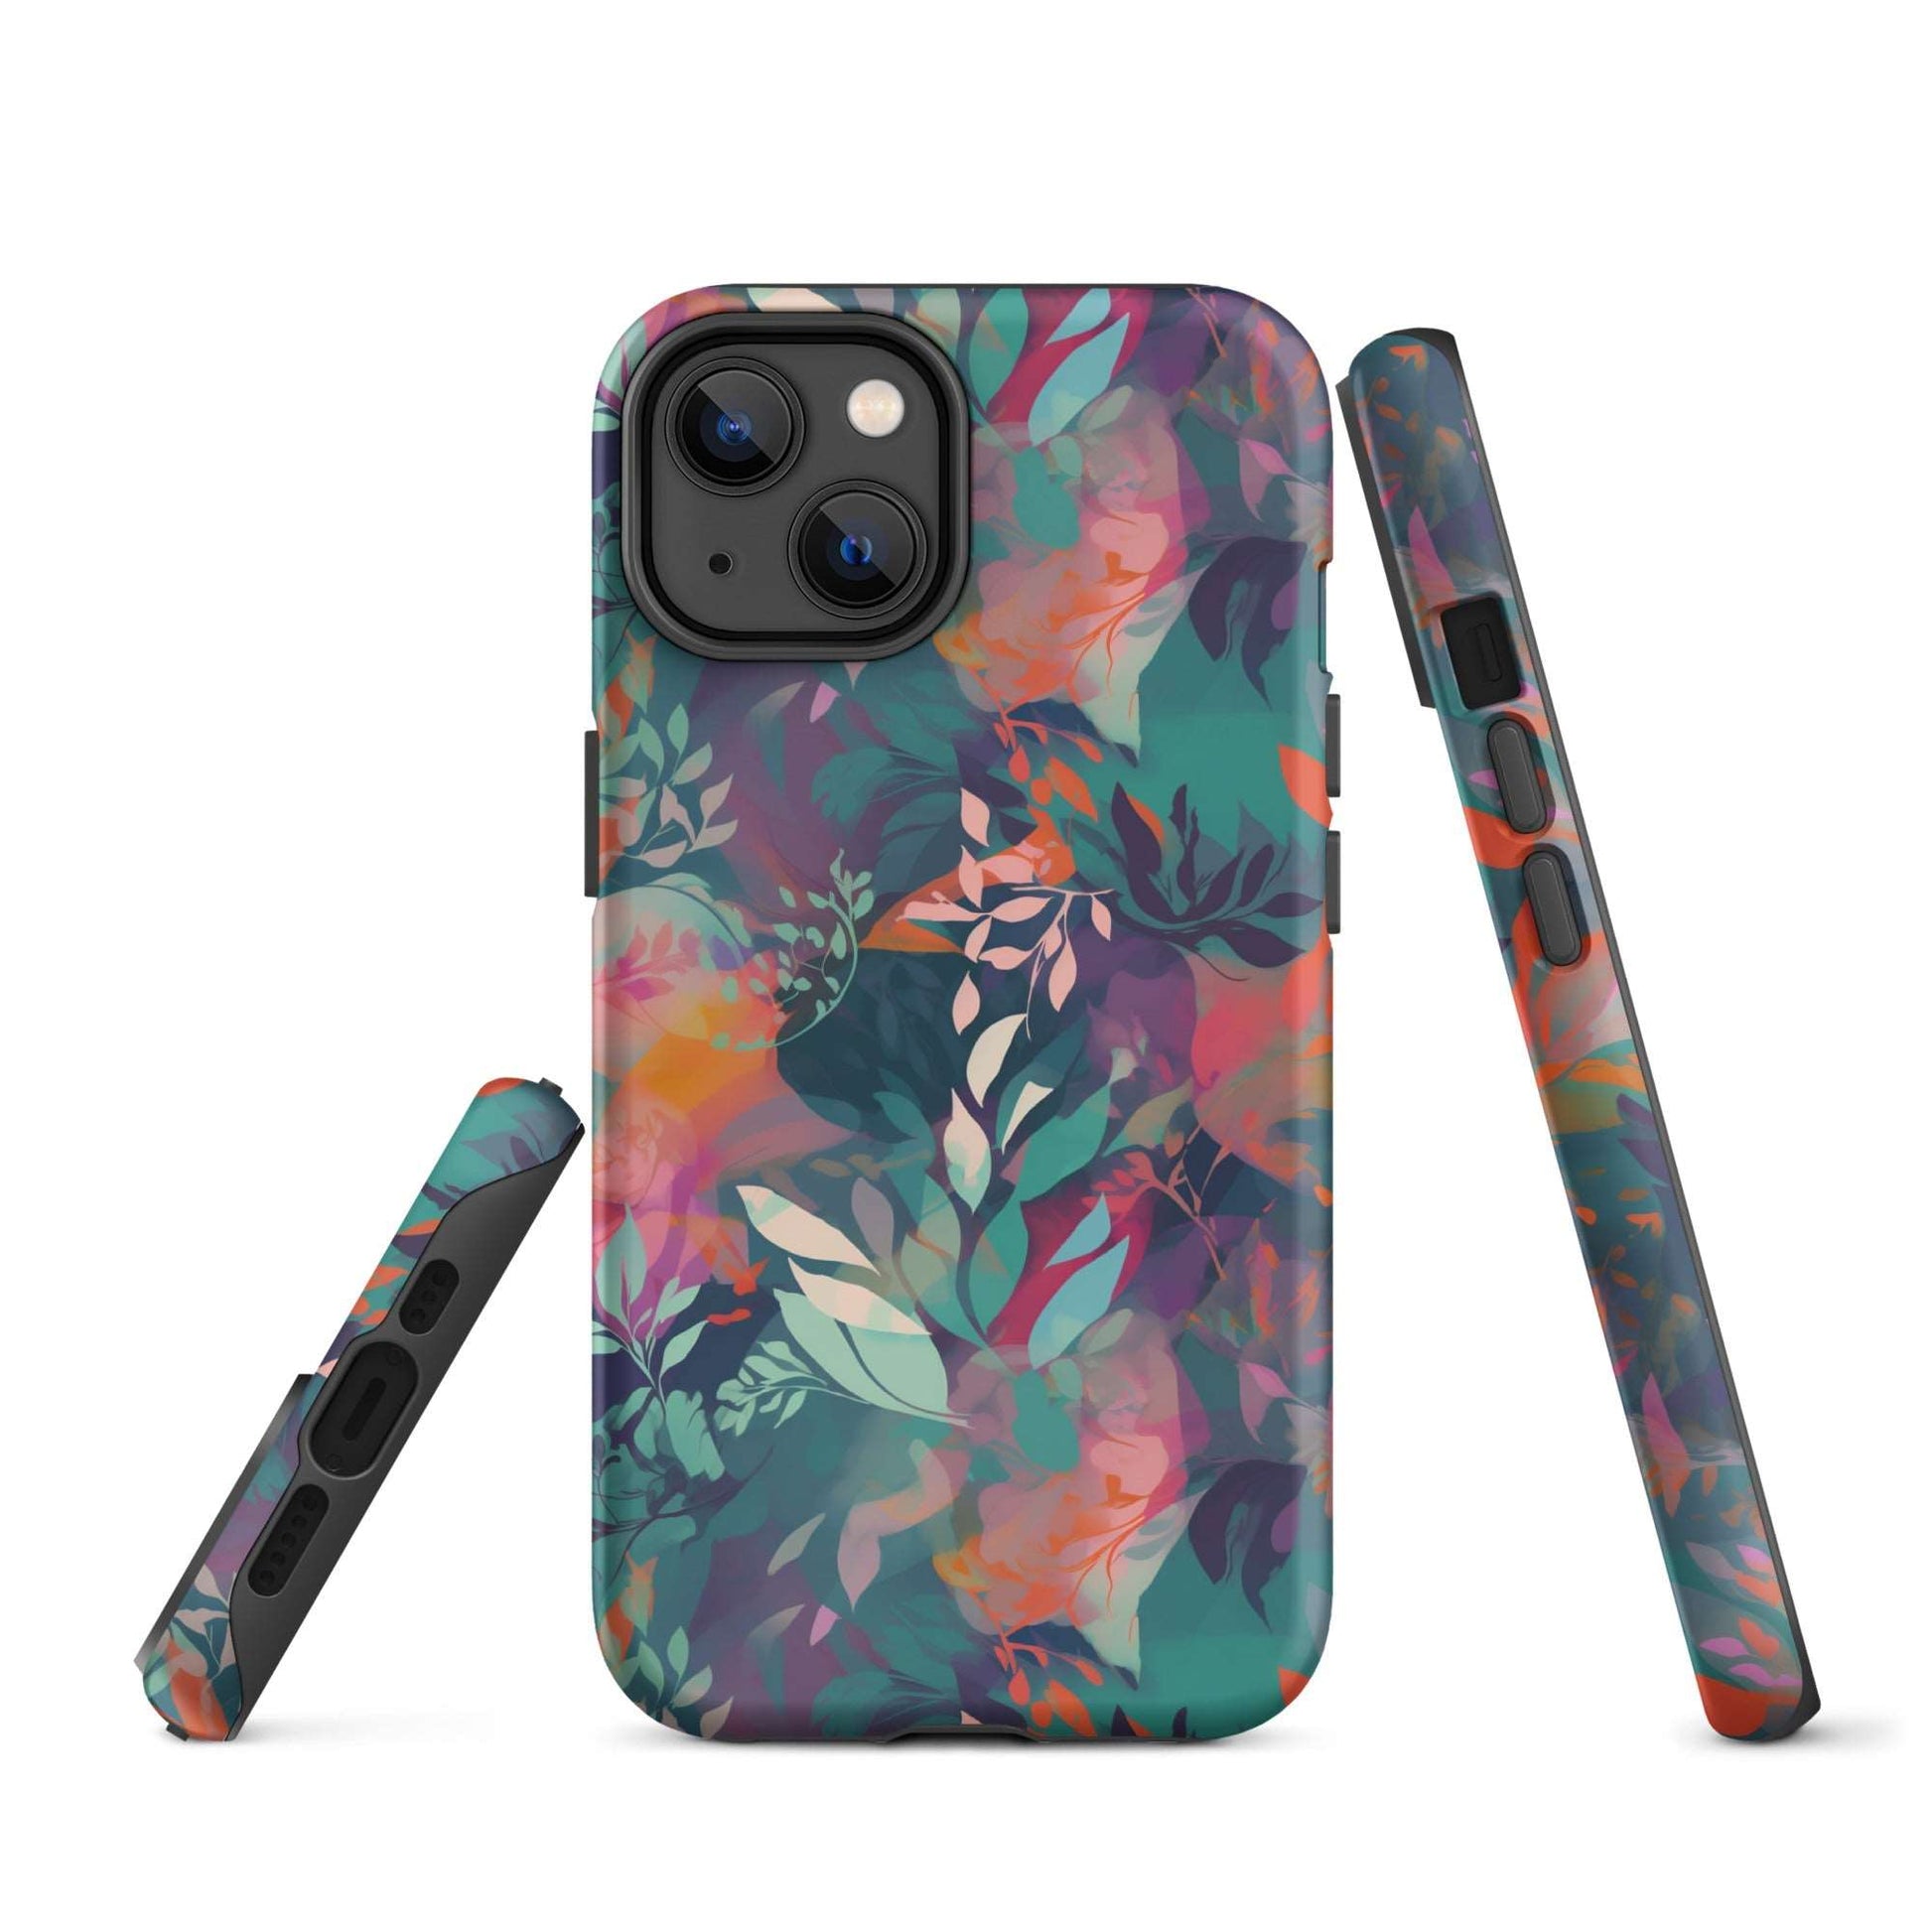 Botanical Bliss - Stylized Abstract Flower Design - iPhone Case - Pattern Symphony